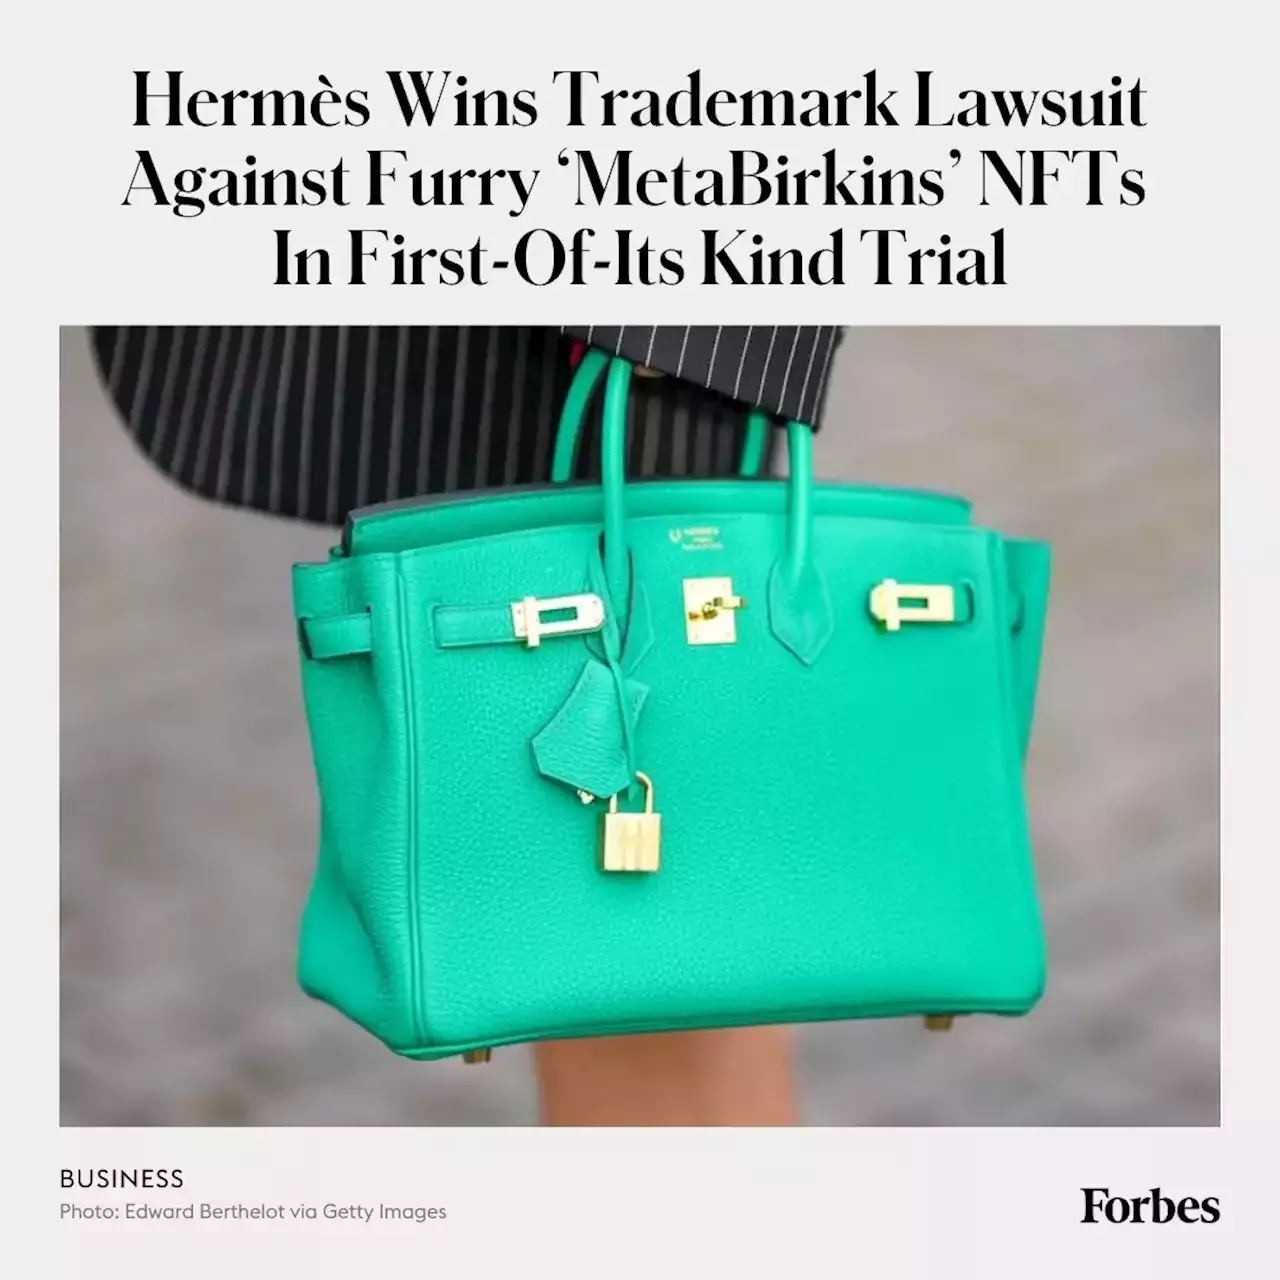 Amid the ongoing MetaBirkins trademark fight, #Hermès has